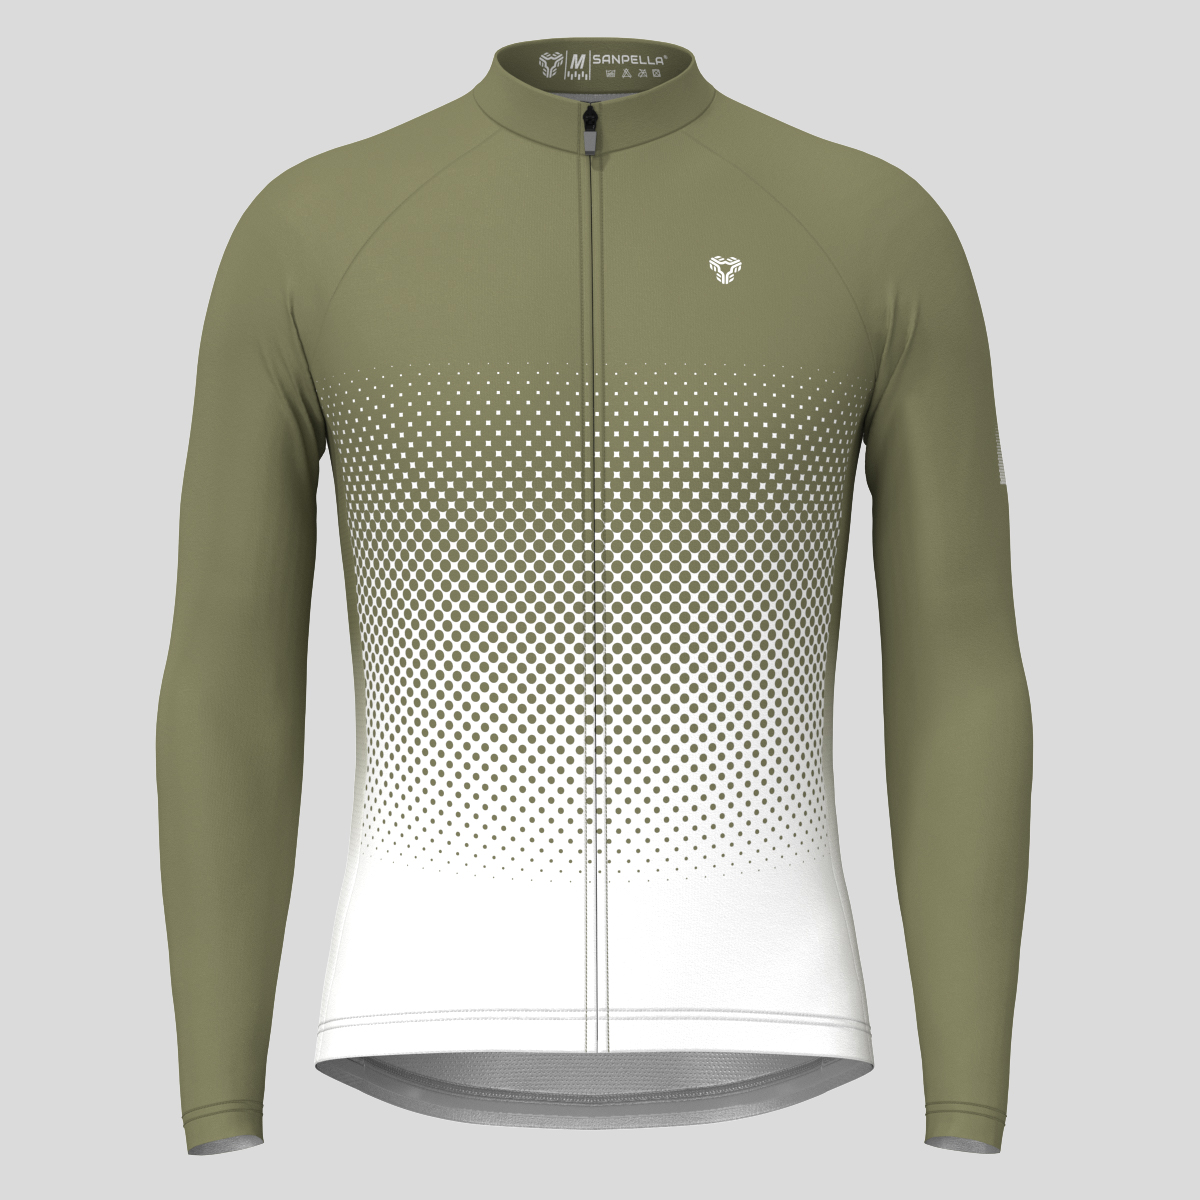 Polka Dot Gradient Men's LS Cycling Jersey - Olive